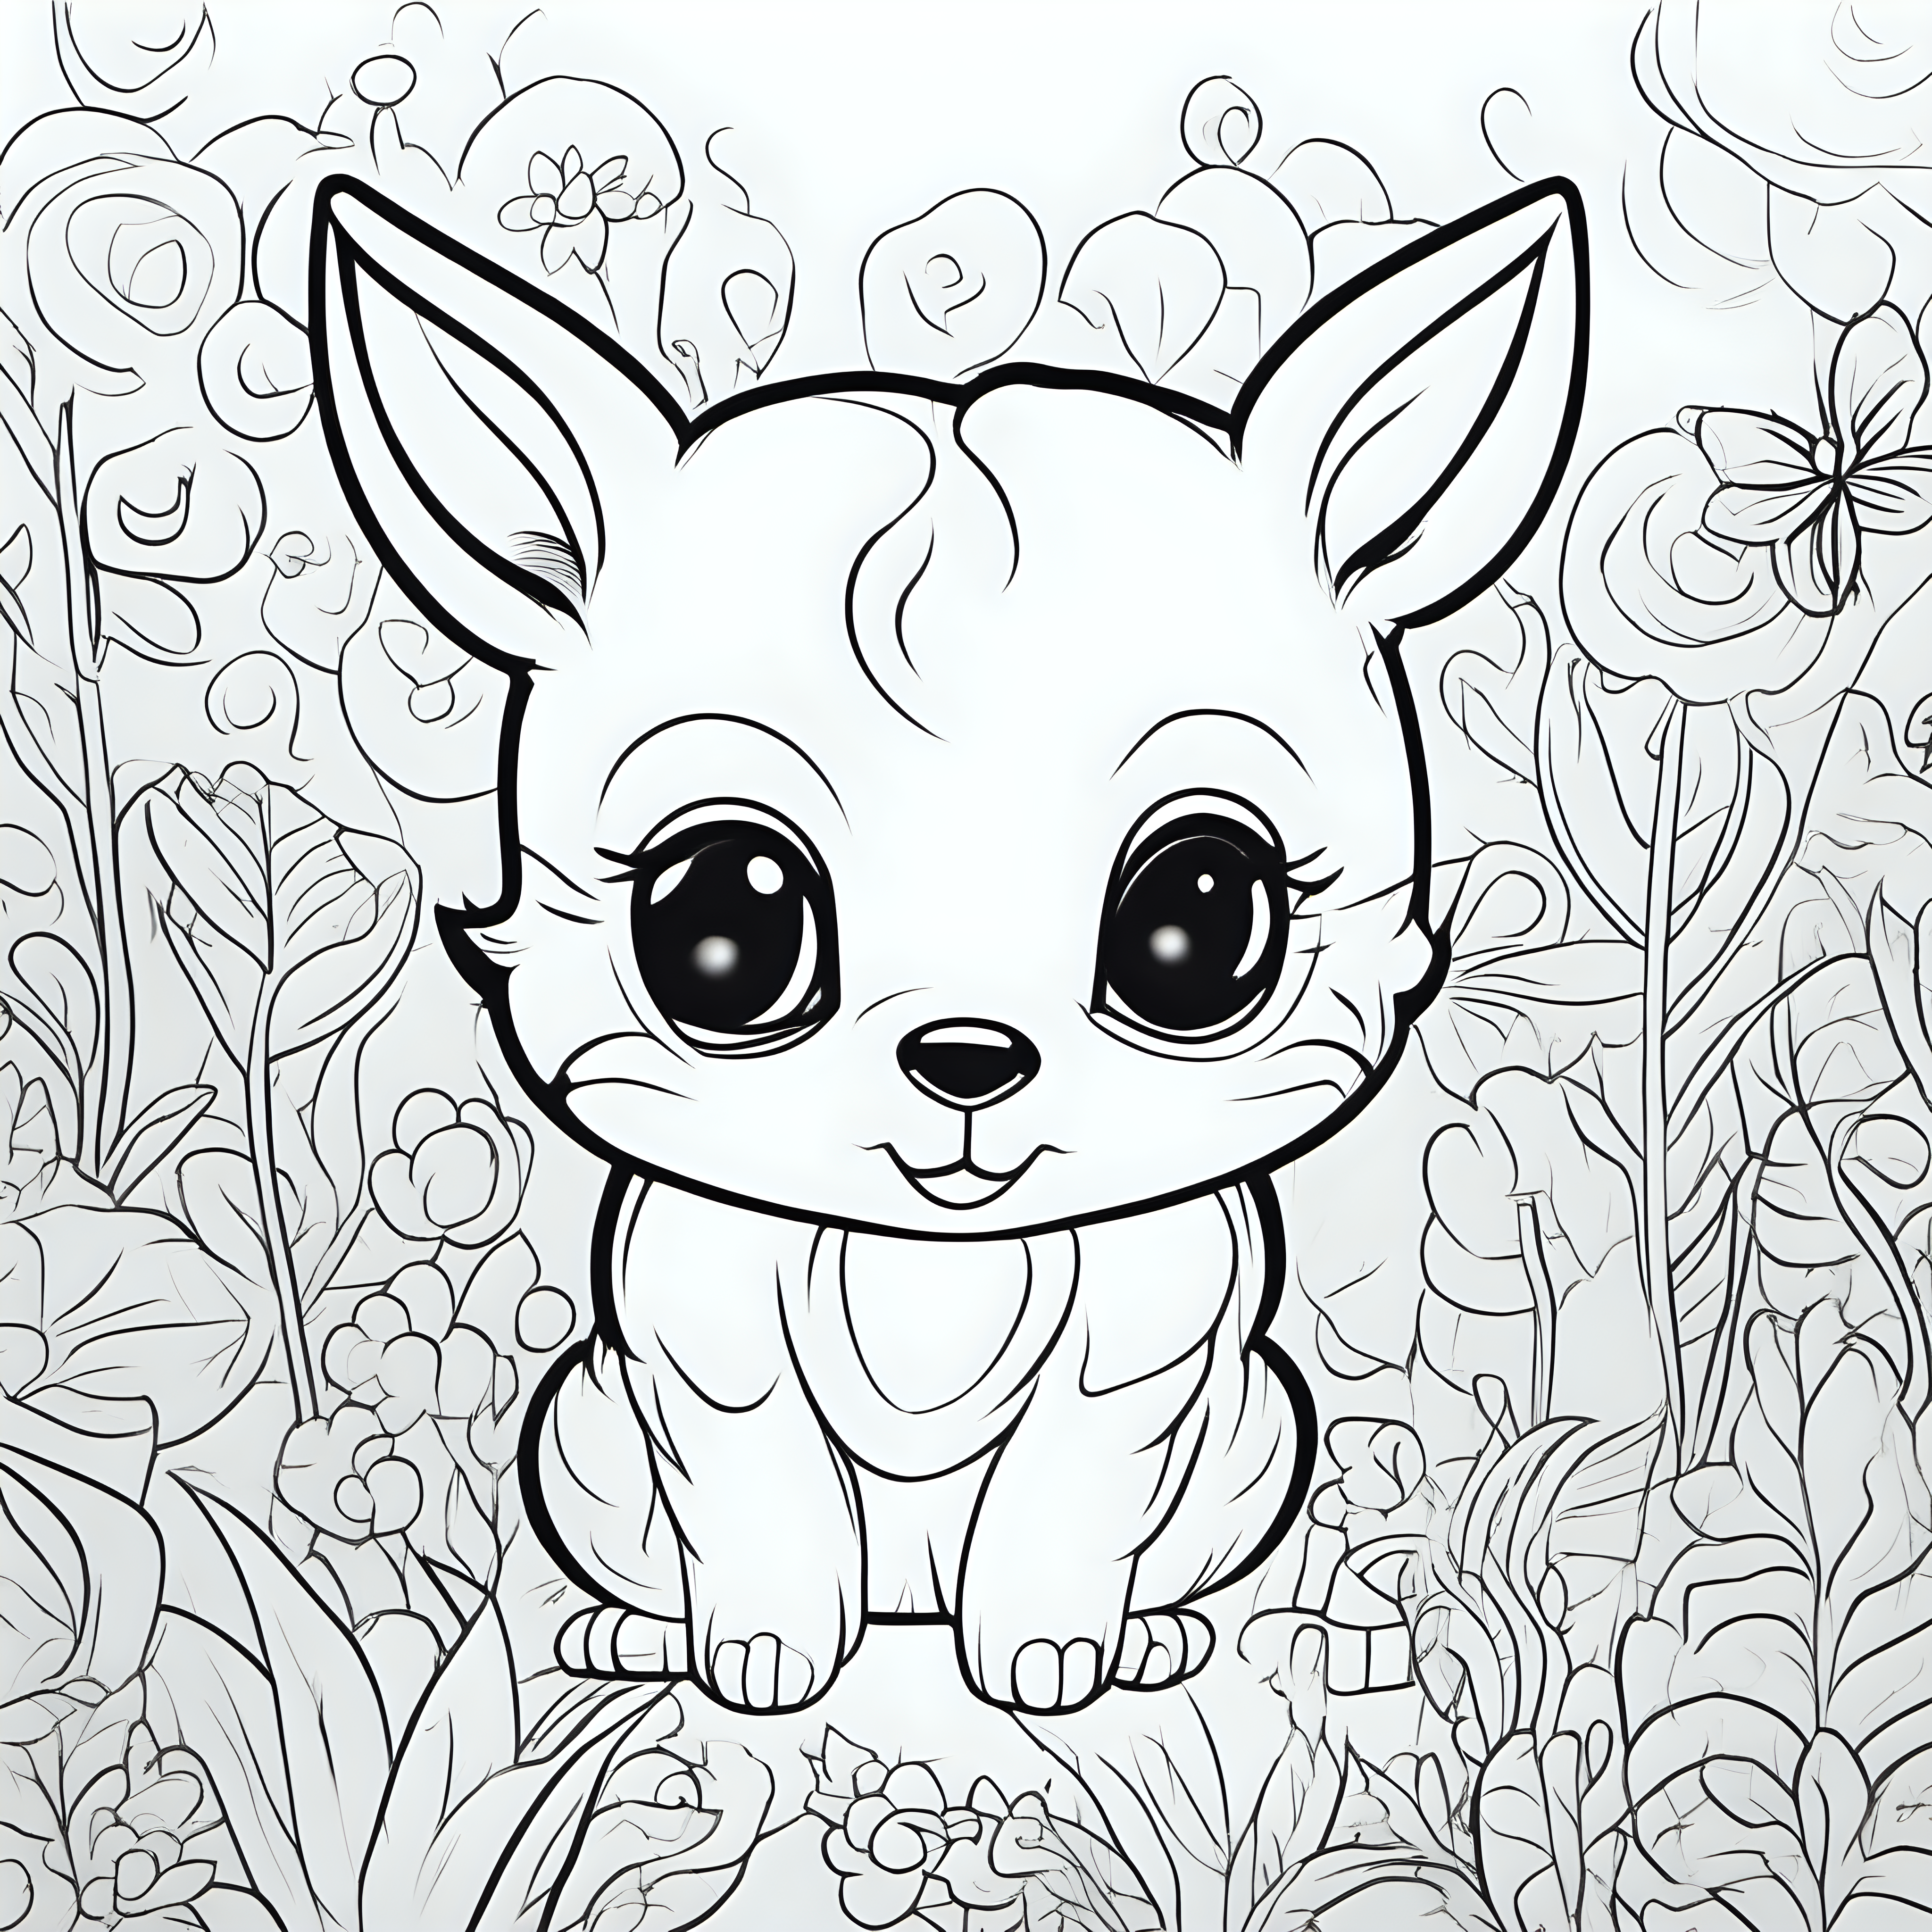 draw cute animals with only the well defined outline in back for a coloring book with no watermark in the backgrounf